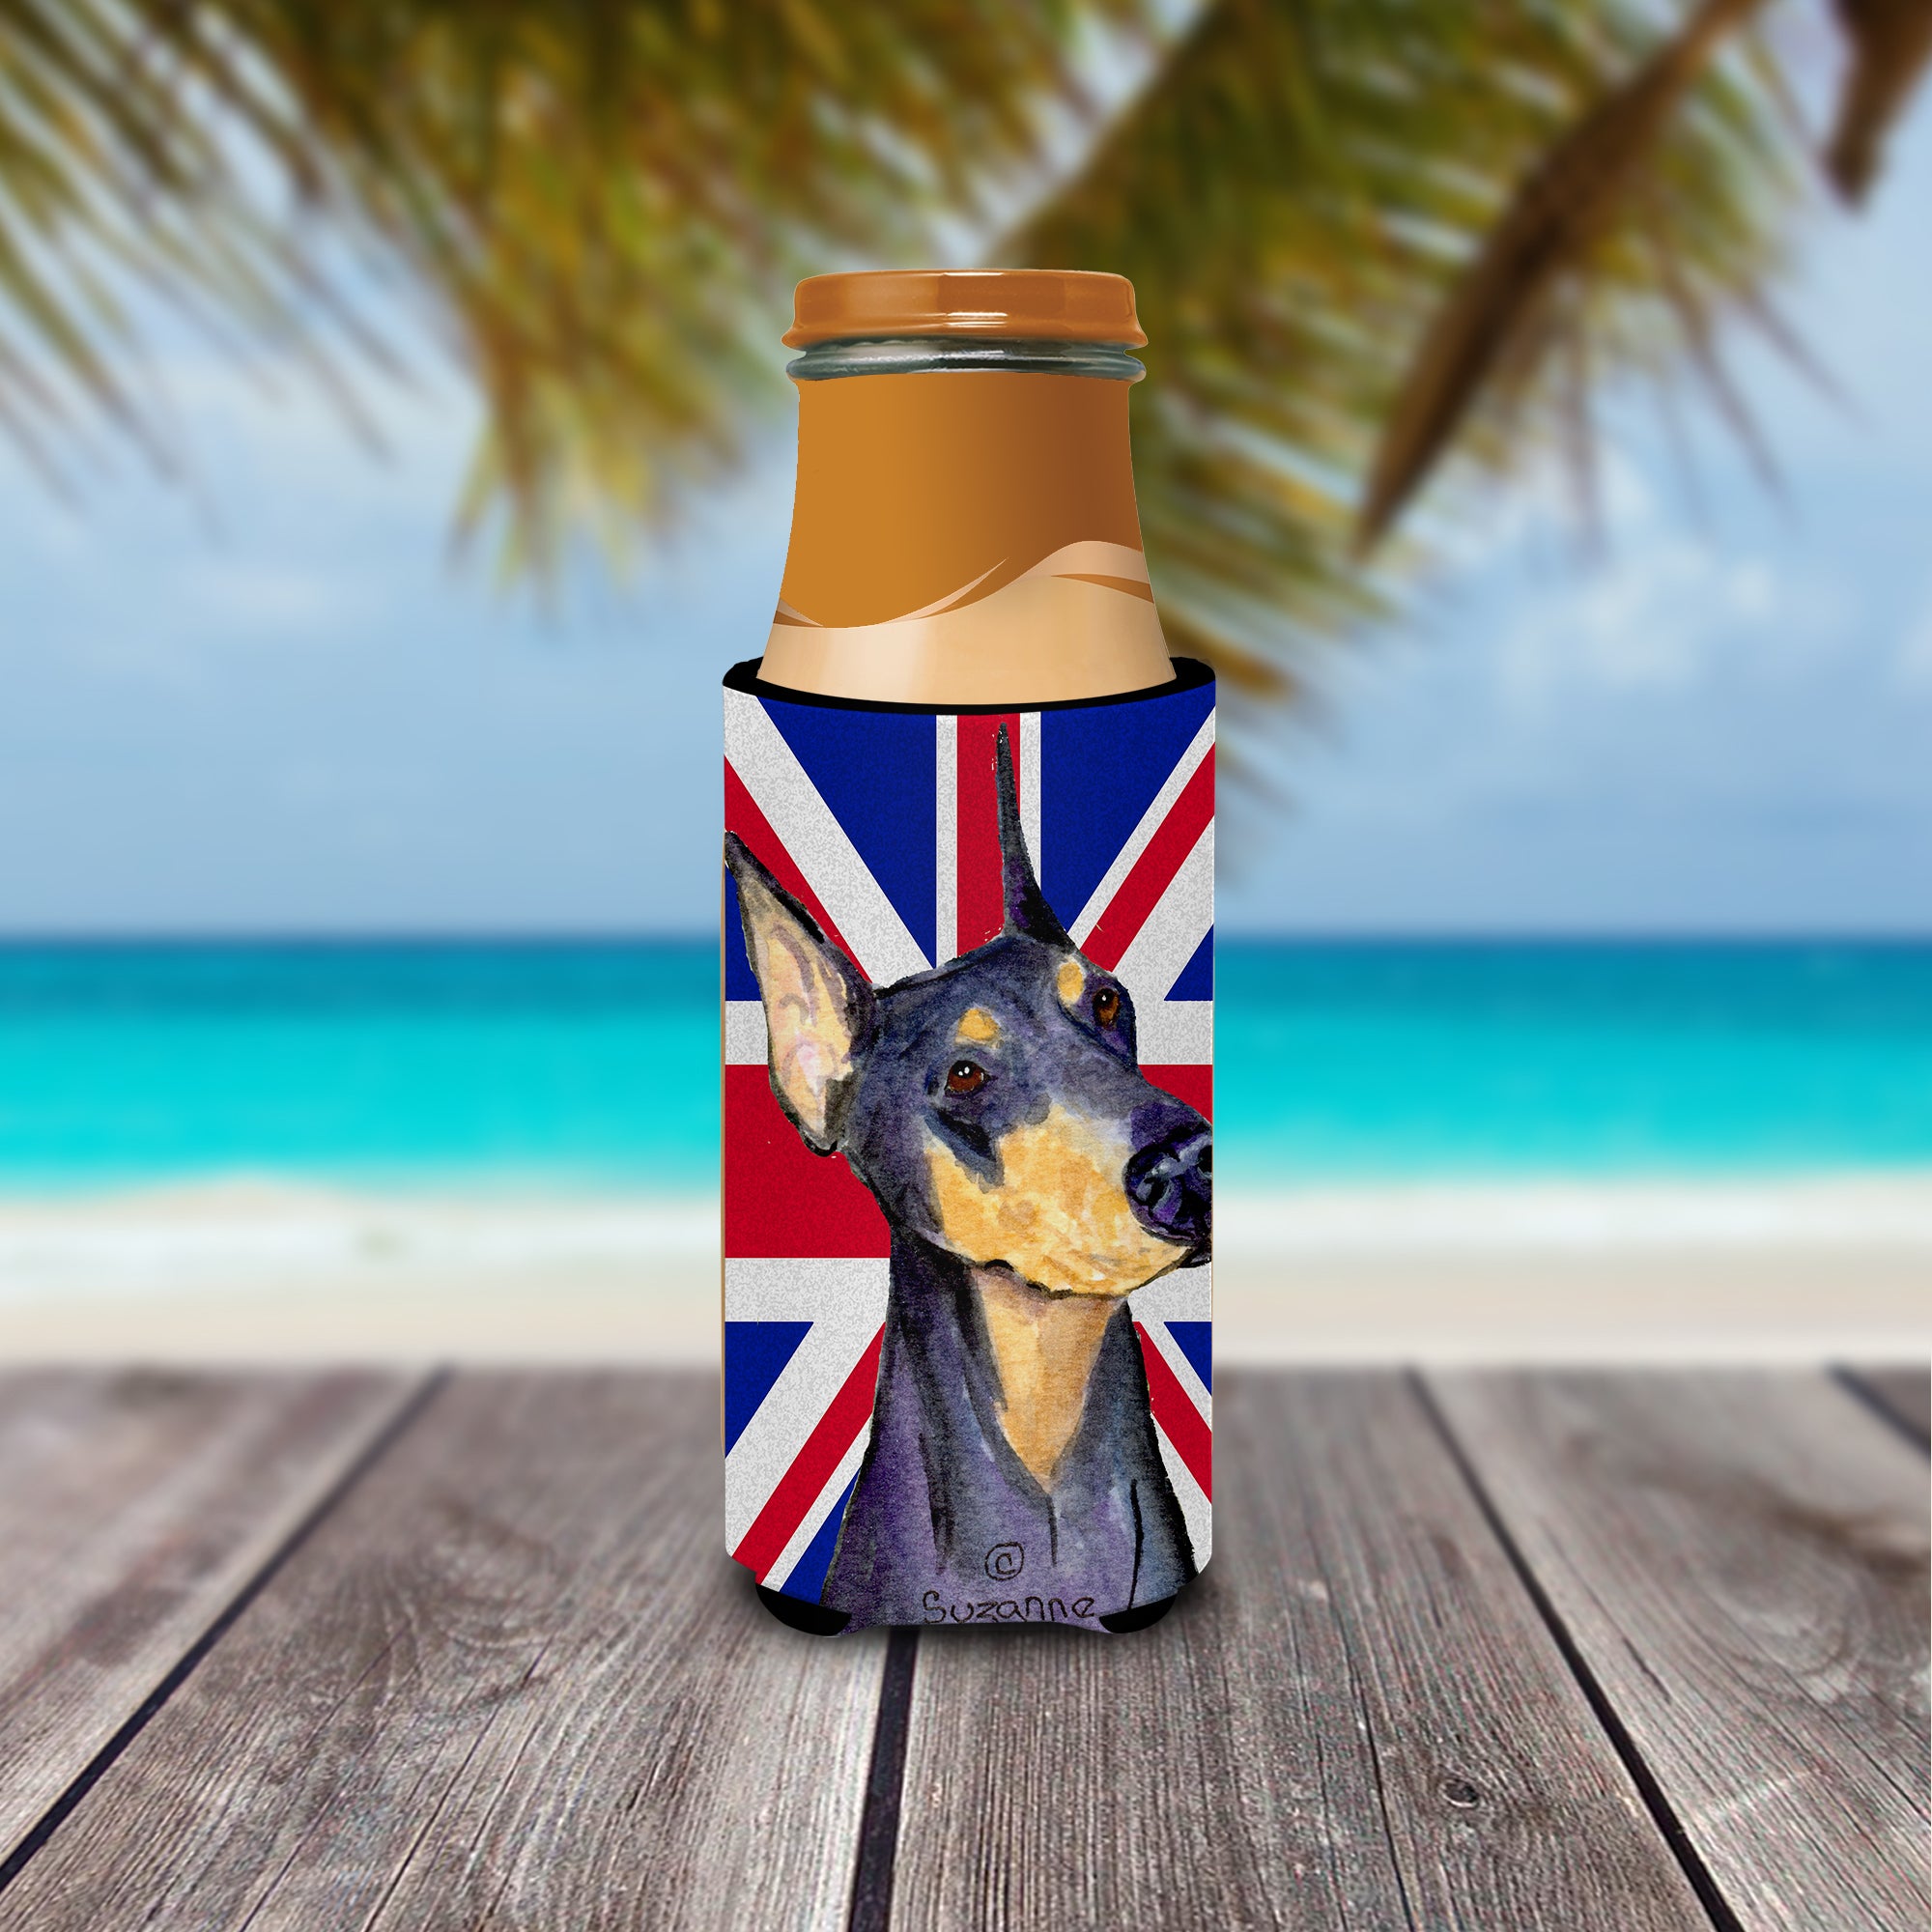 Doberman with English Union Jack British Flag Ultra Beverage Insulators for slim cans SS4937MUK